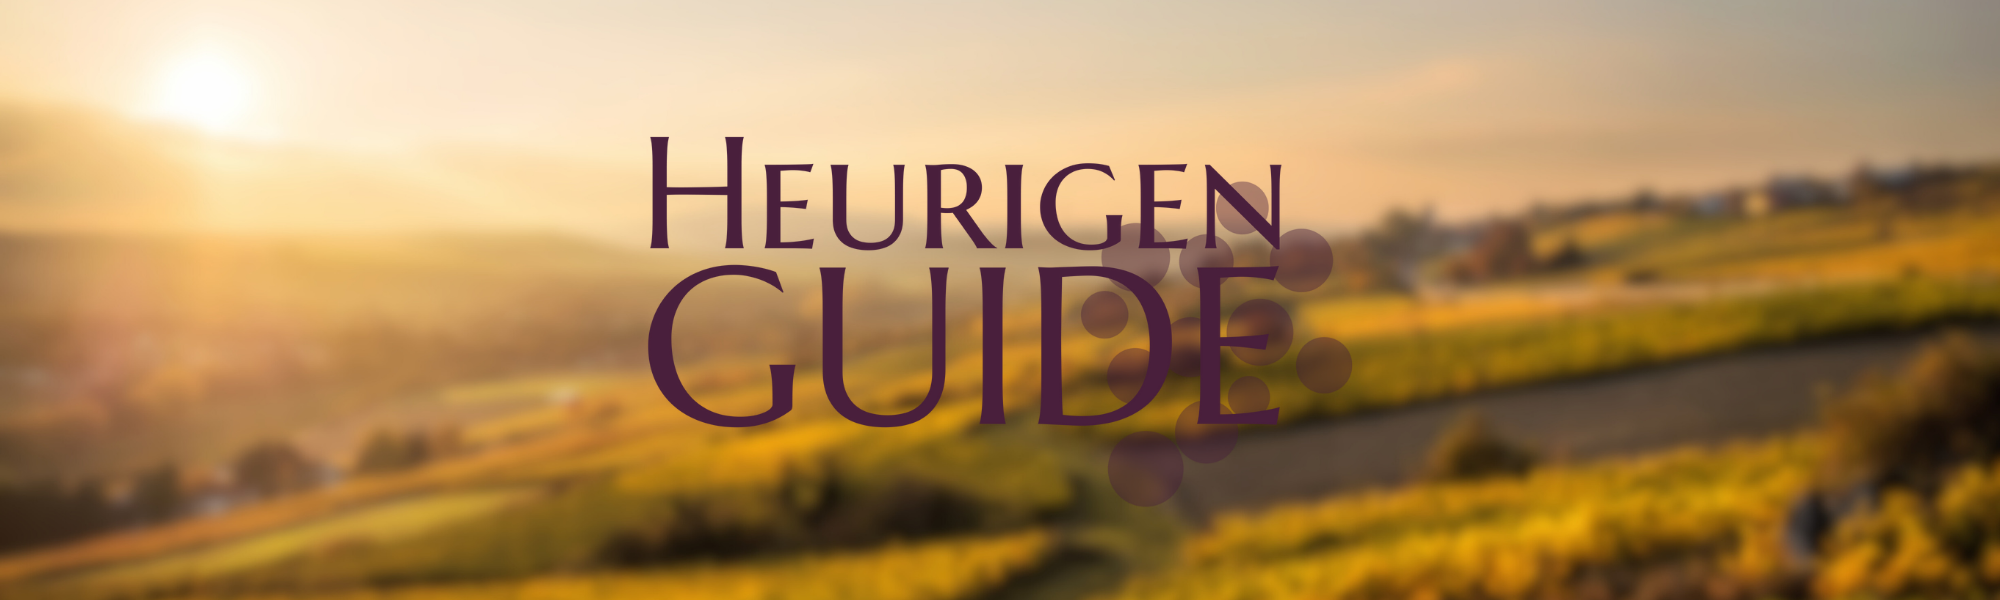 A wine region in the background with the logo of "Heurigen Guide" in the center